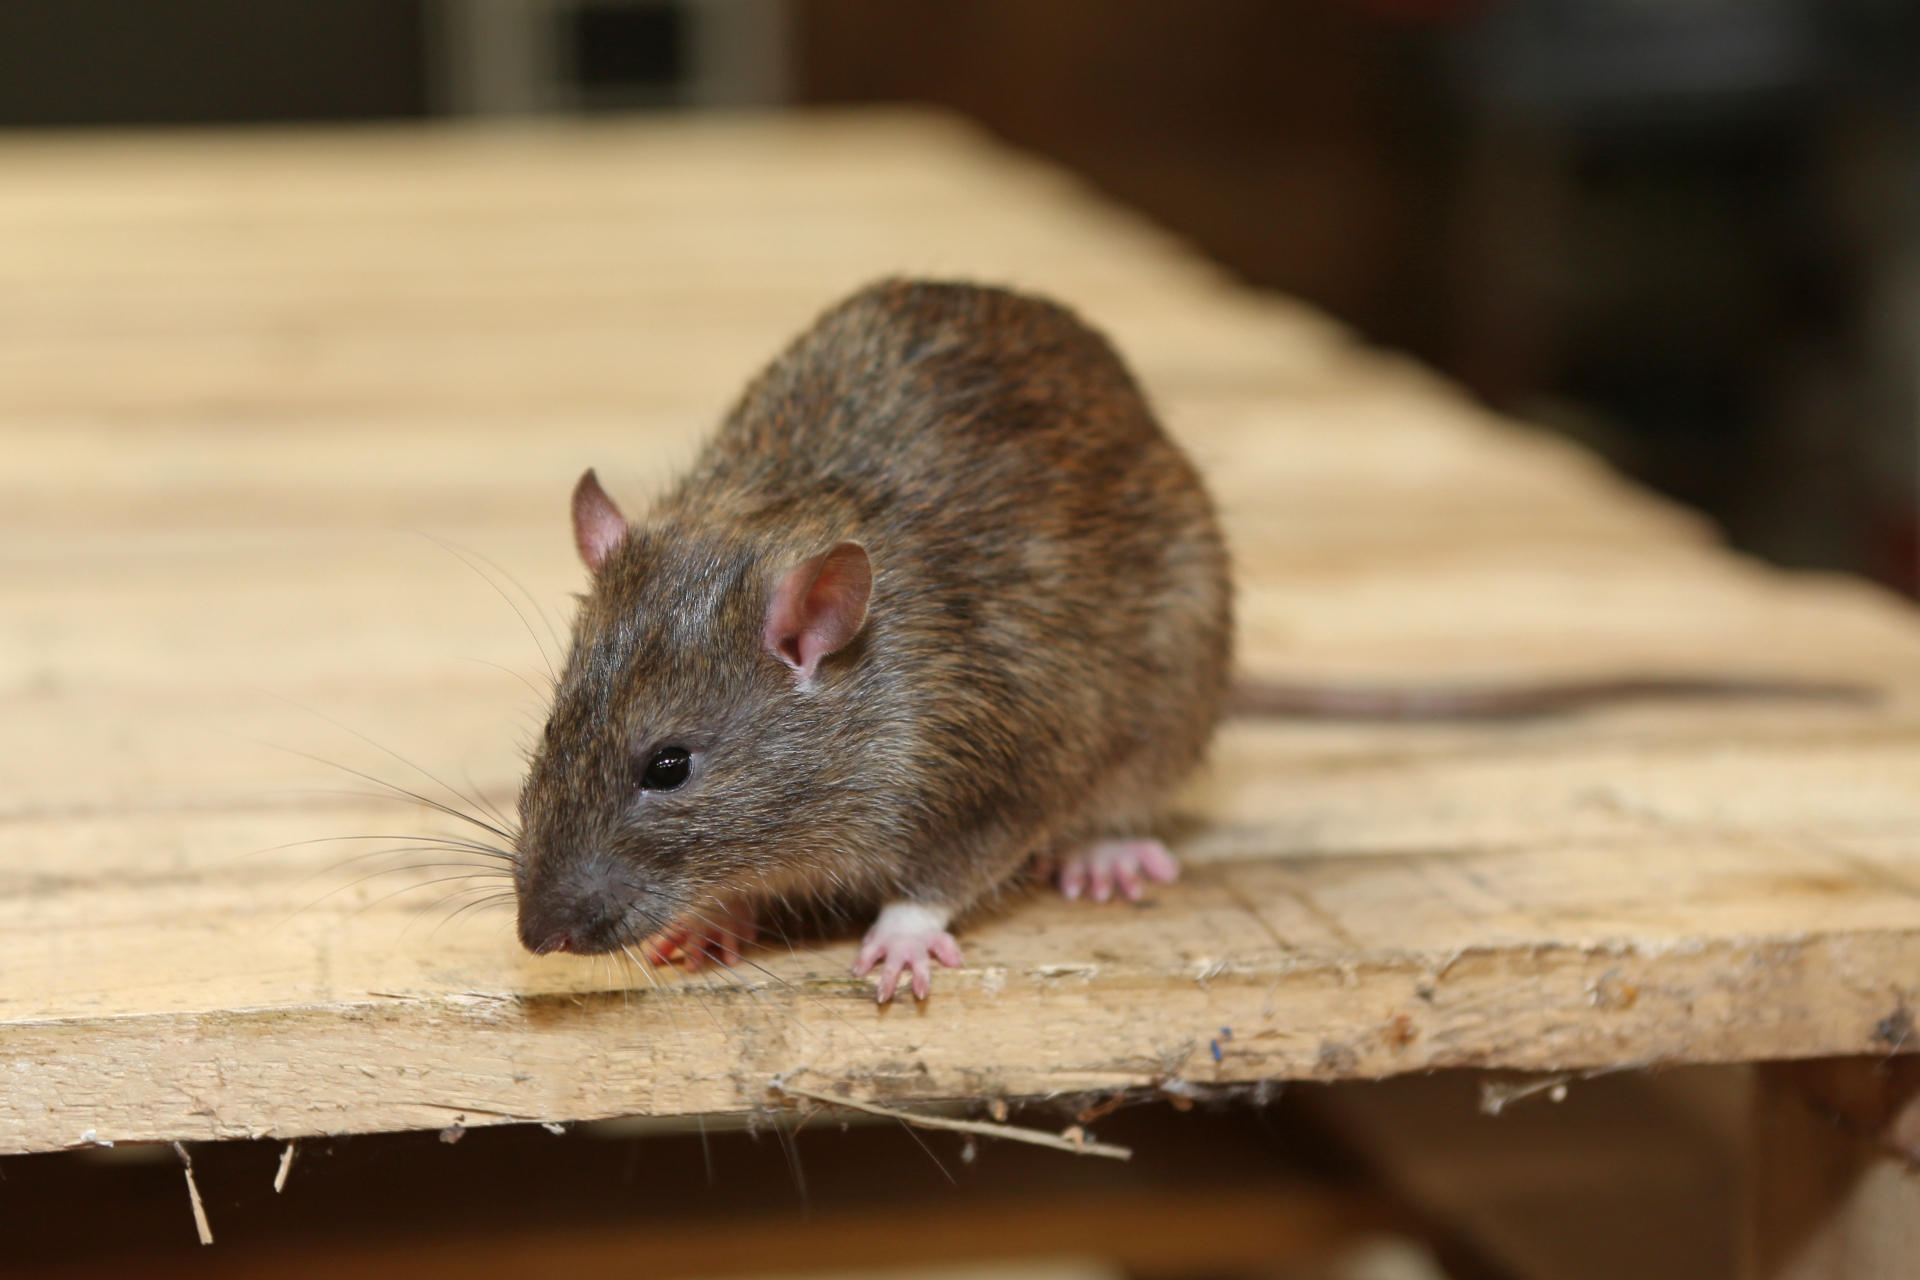 Rat Infestation, Pest Control in Charlton, SE7. Call Now 020 8166 9746